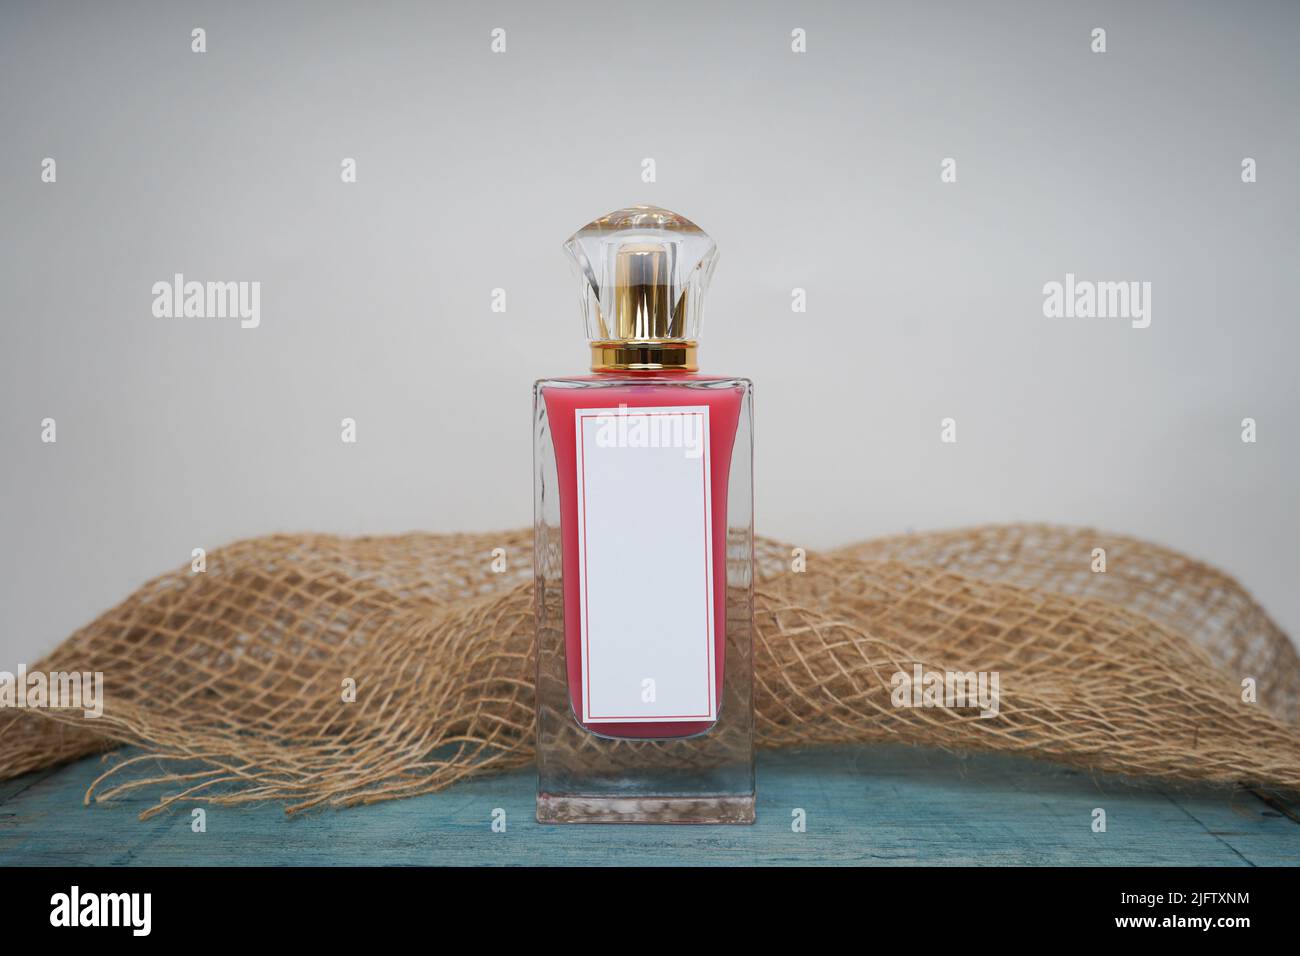 Red Perfume bottle and cap for branding isolated on white background with green table and burlap, Red Perfume bottle mockup. Stock Photo